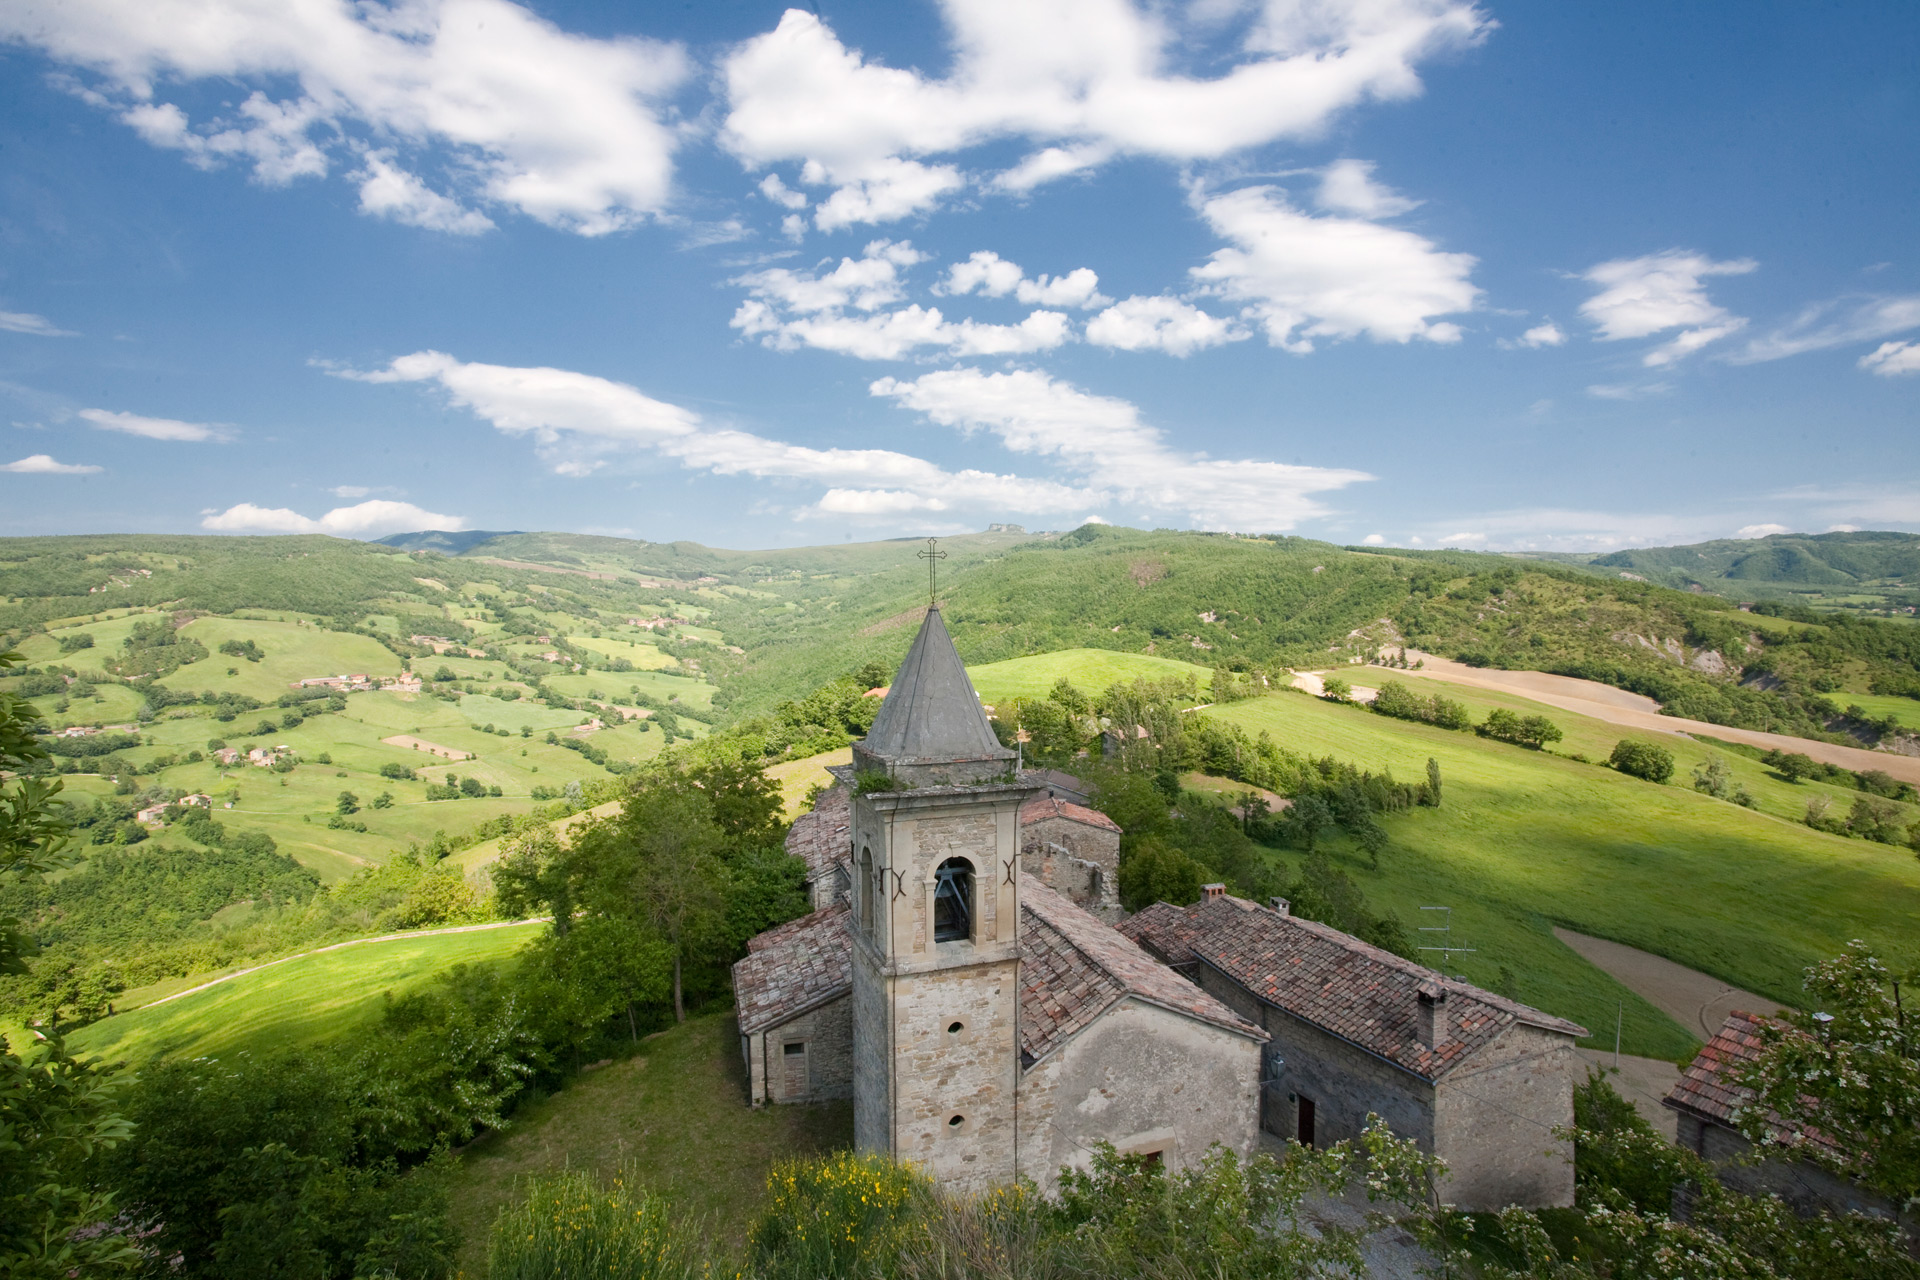 General 1920x1280 architecture house church building hills nature landscape Italy ancient clouds trees forest